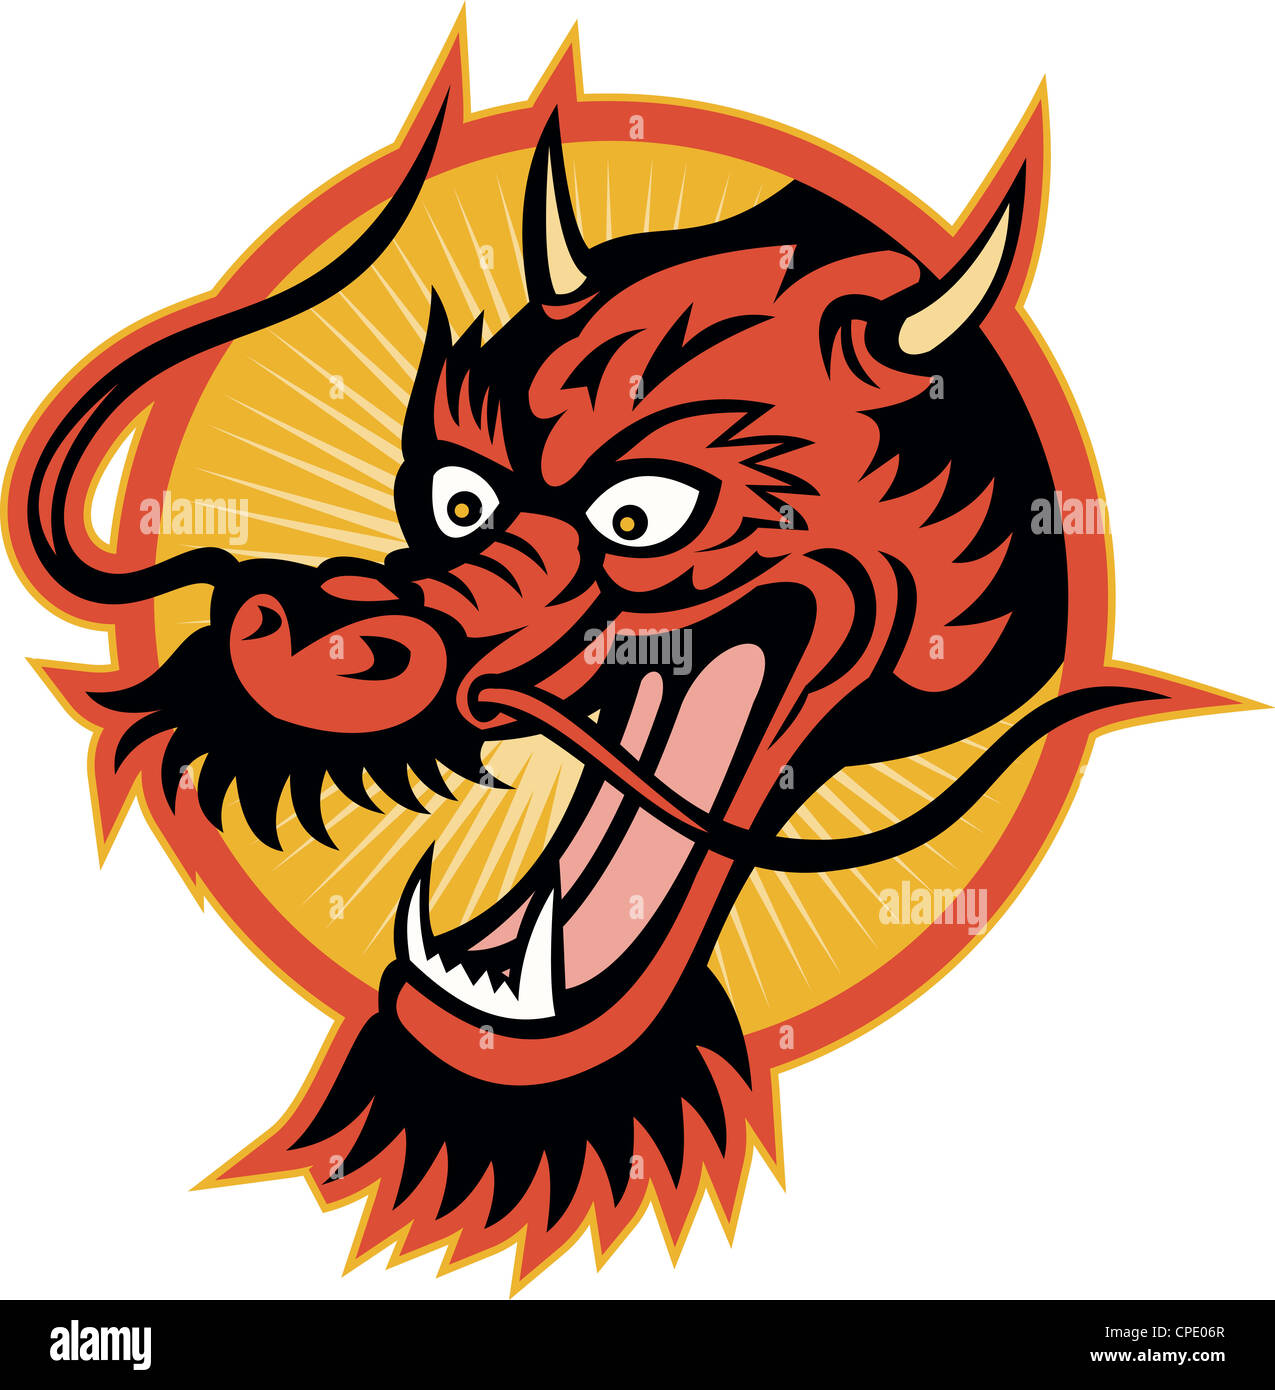 Illustration of a Chinese style red dragon head set inside circle done in retro style. Stock Photo